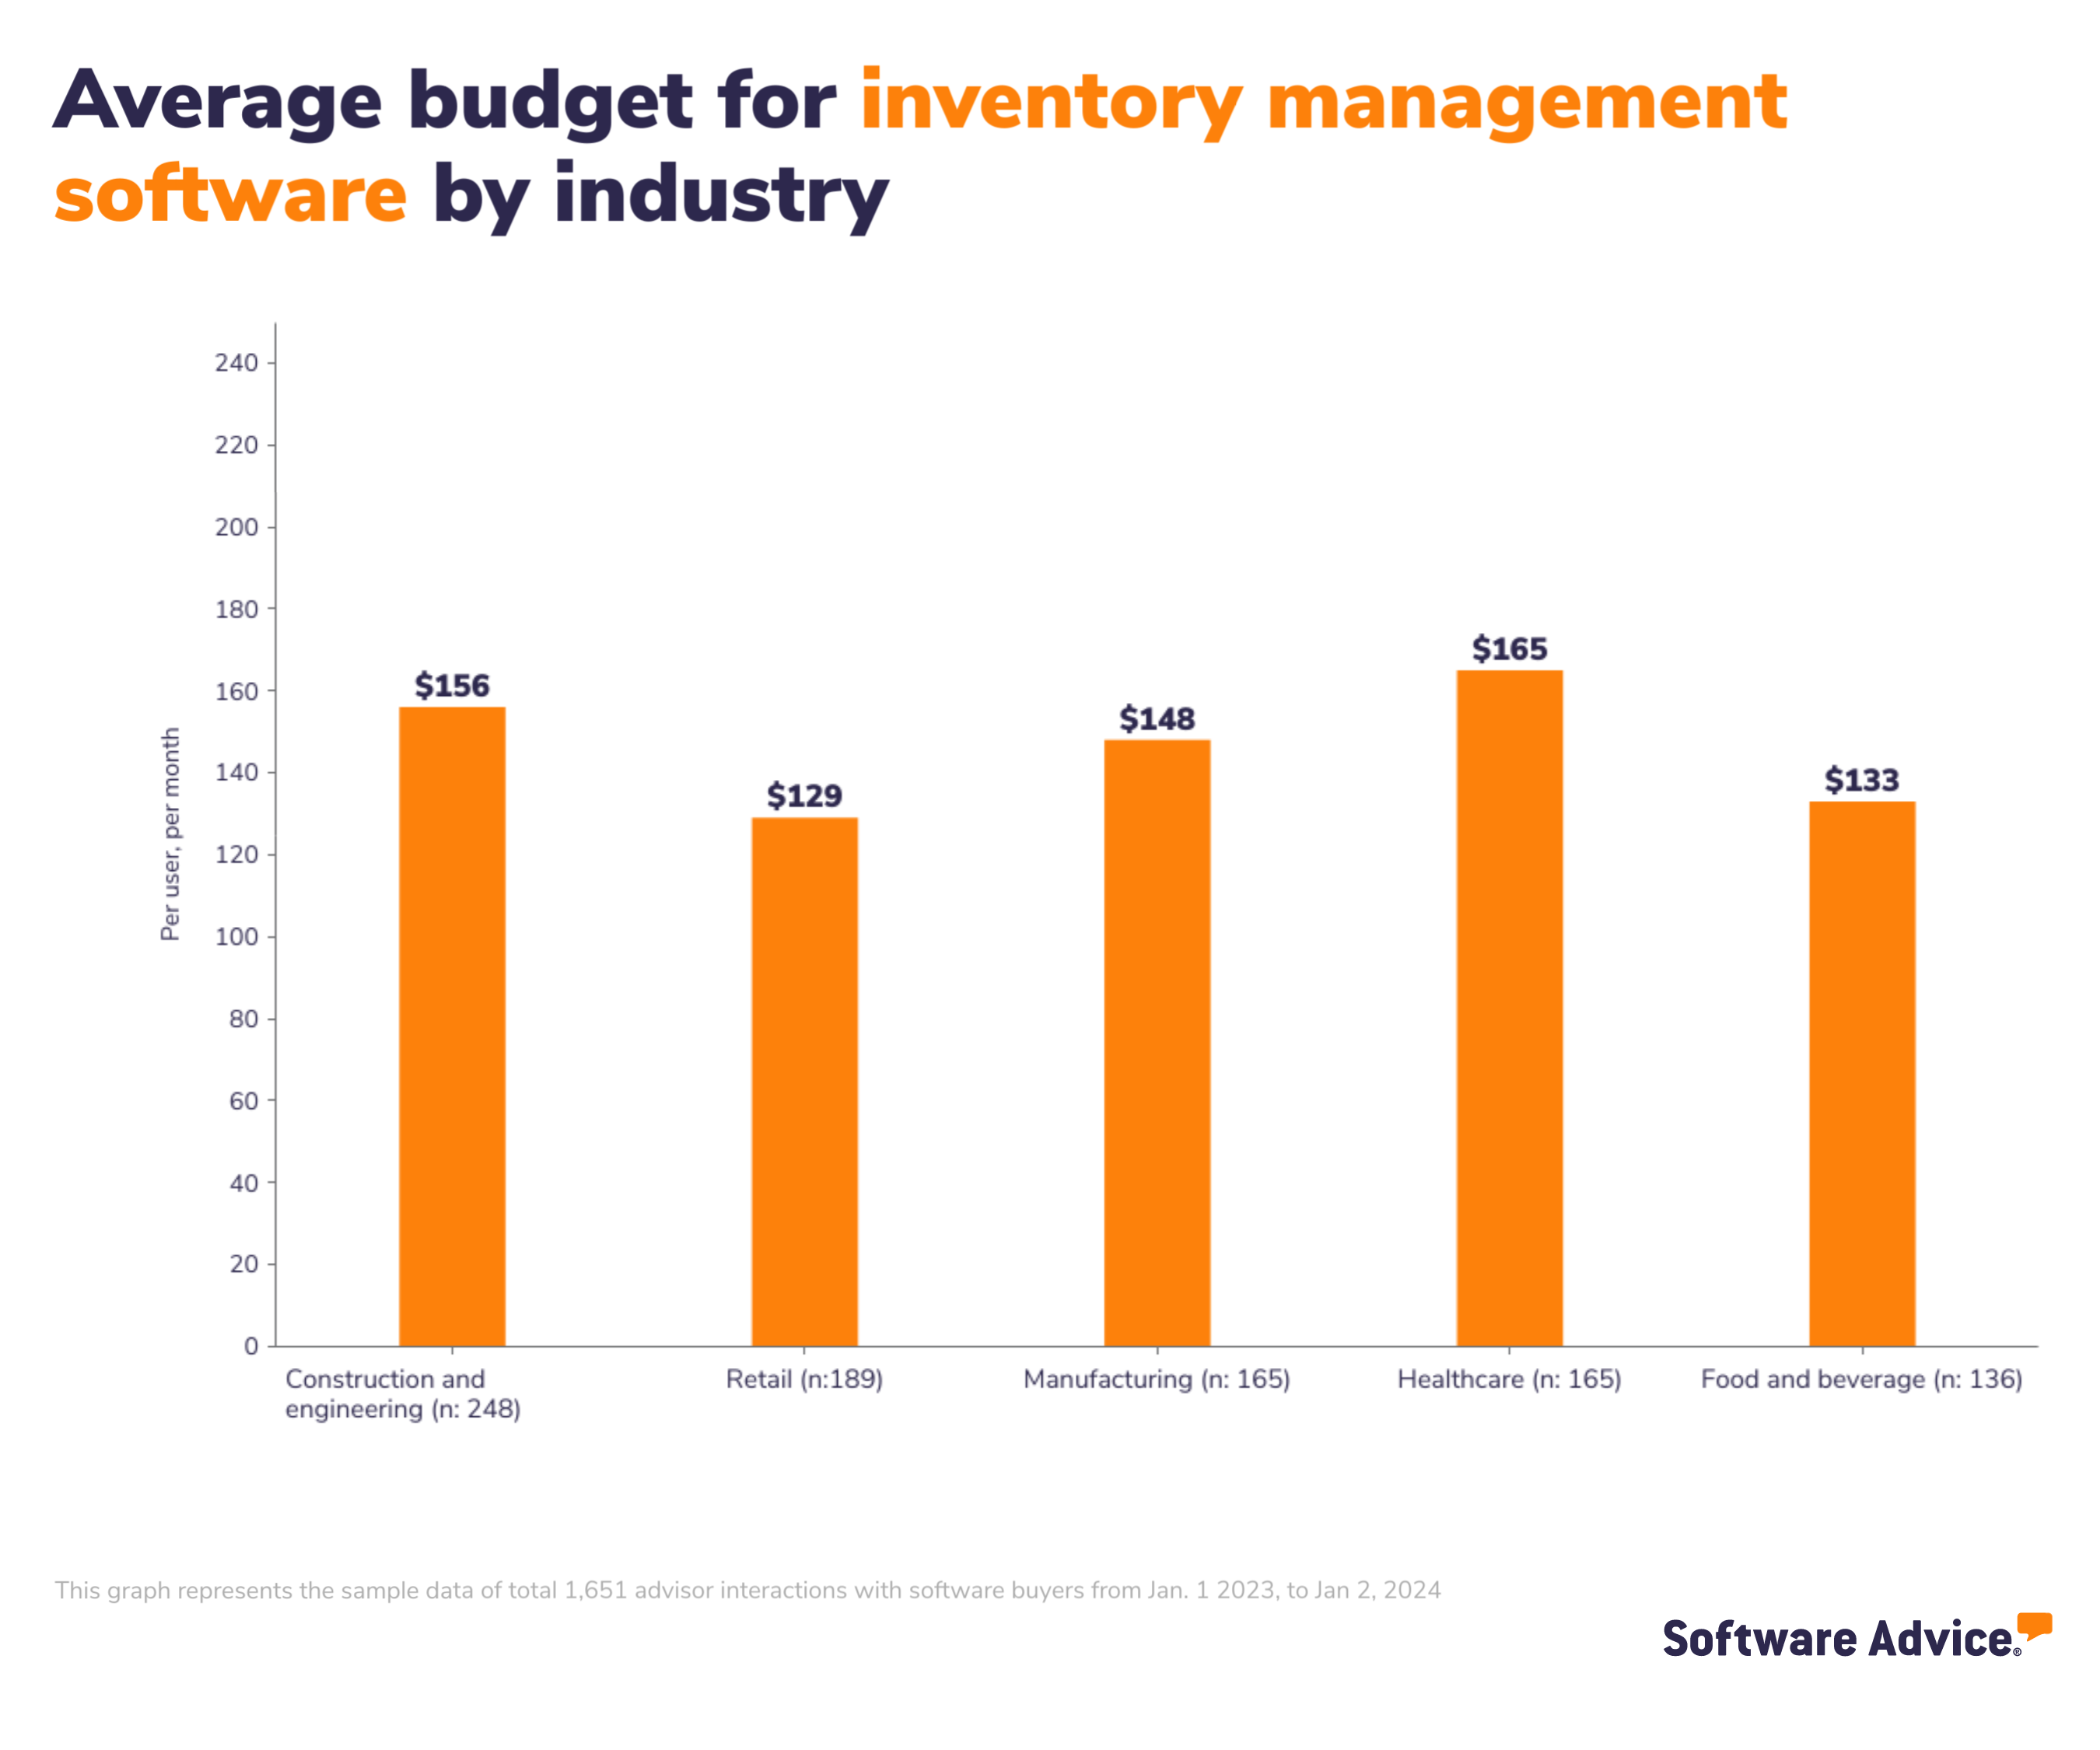 Average budget for inventory management software by industry